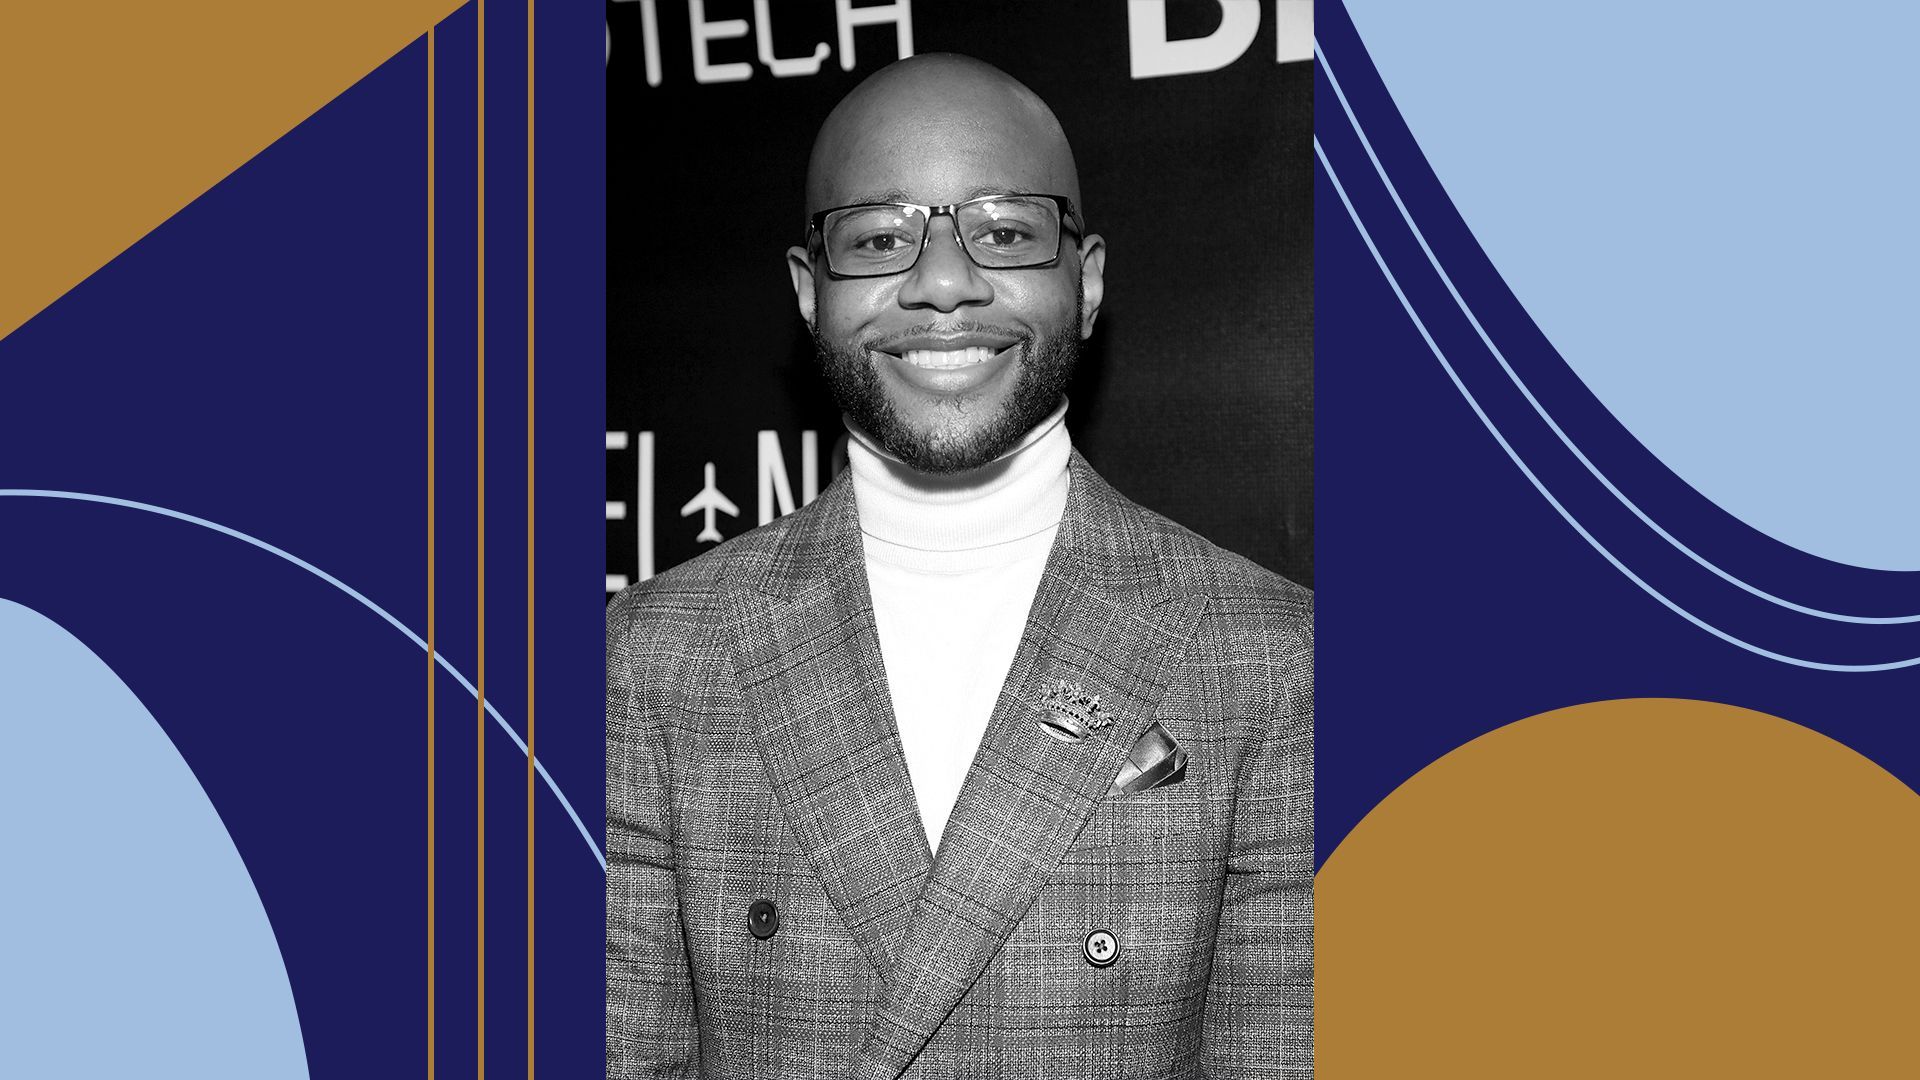 Photo illustration of Jeff Nelson, COO of Blavity, set amongst blue and gold graphic shapes and lines 